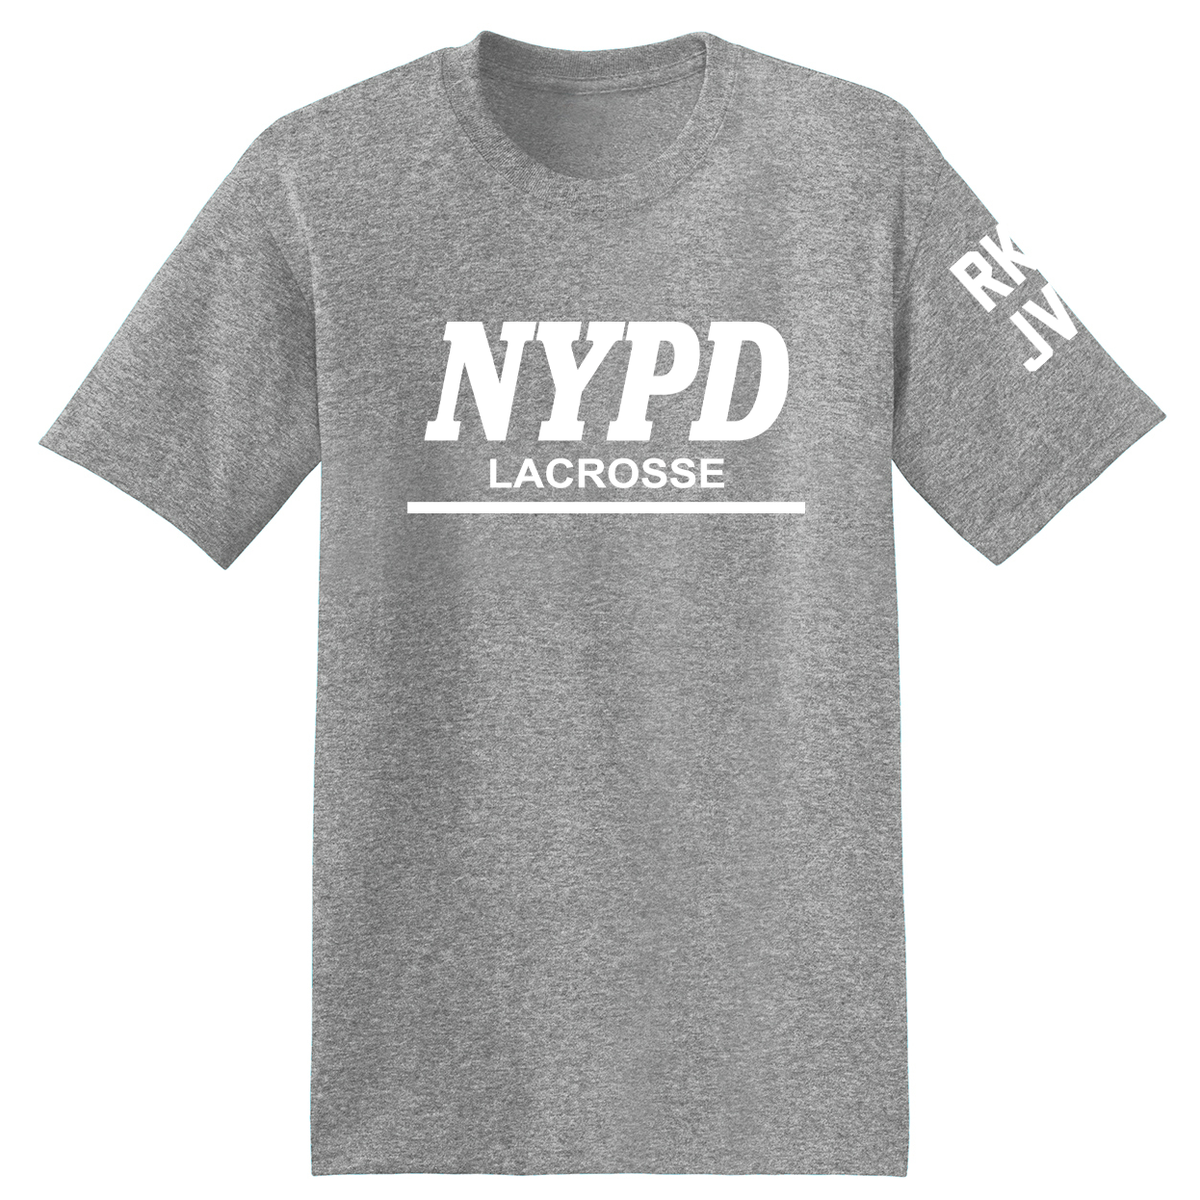 NYPD Lacrosse T-Shirt